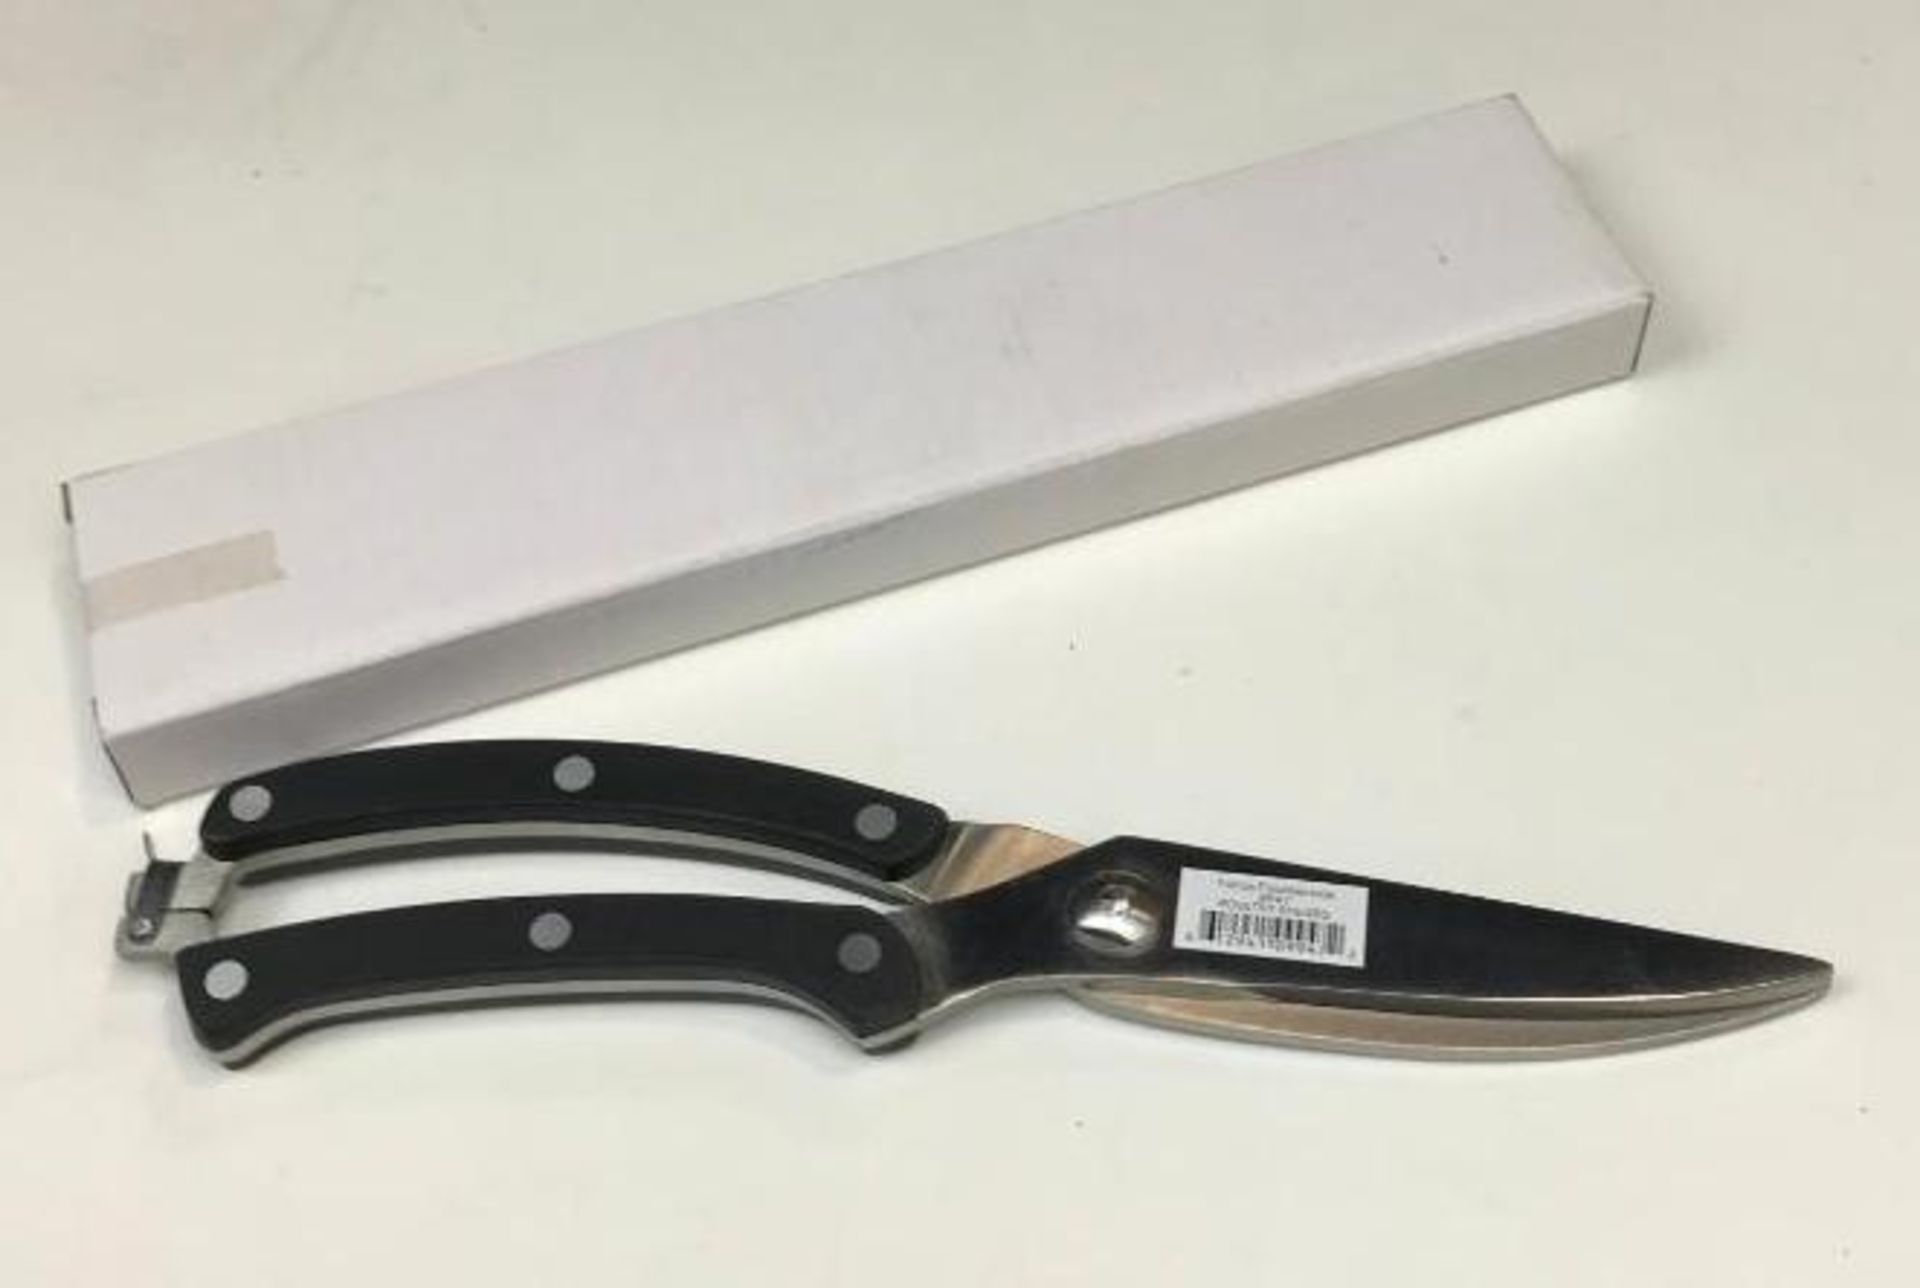 POULTRY SHEARS, FOCUS 9947 - NEW - Image 2 of 2